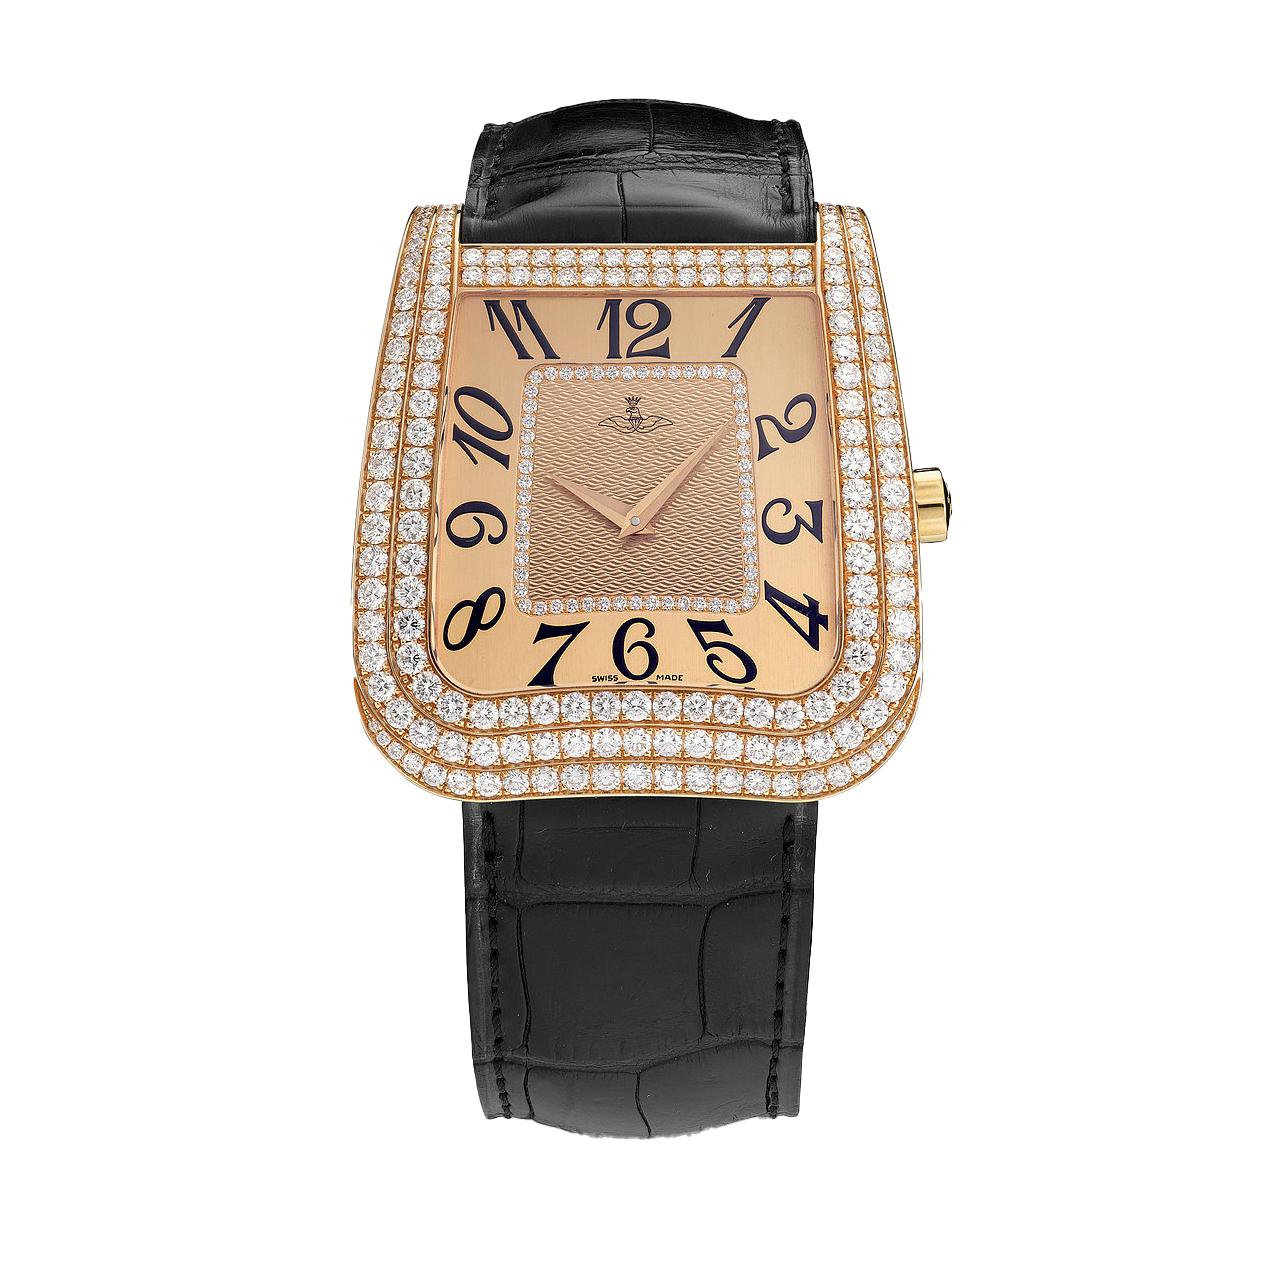 Watch in pink gold 18kt set with 247 diamonds 5.09 cts on case and prong buckle alligator strap quartz movement.       

We do not guarantee the functioning of this watch.